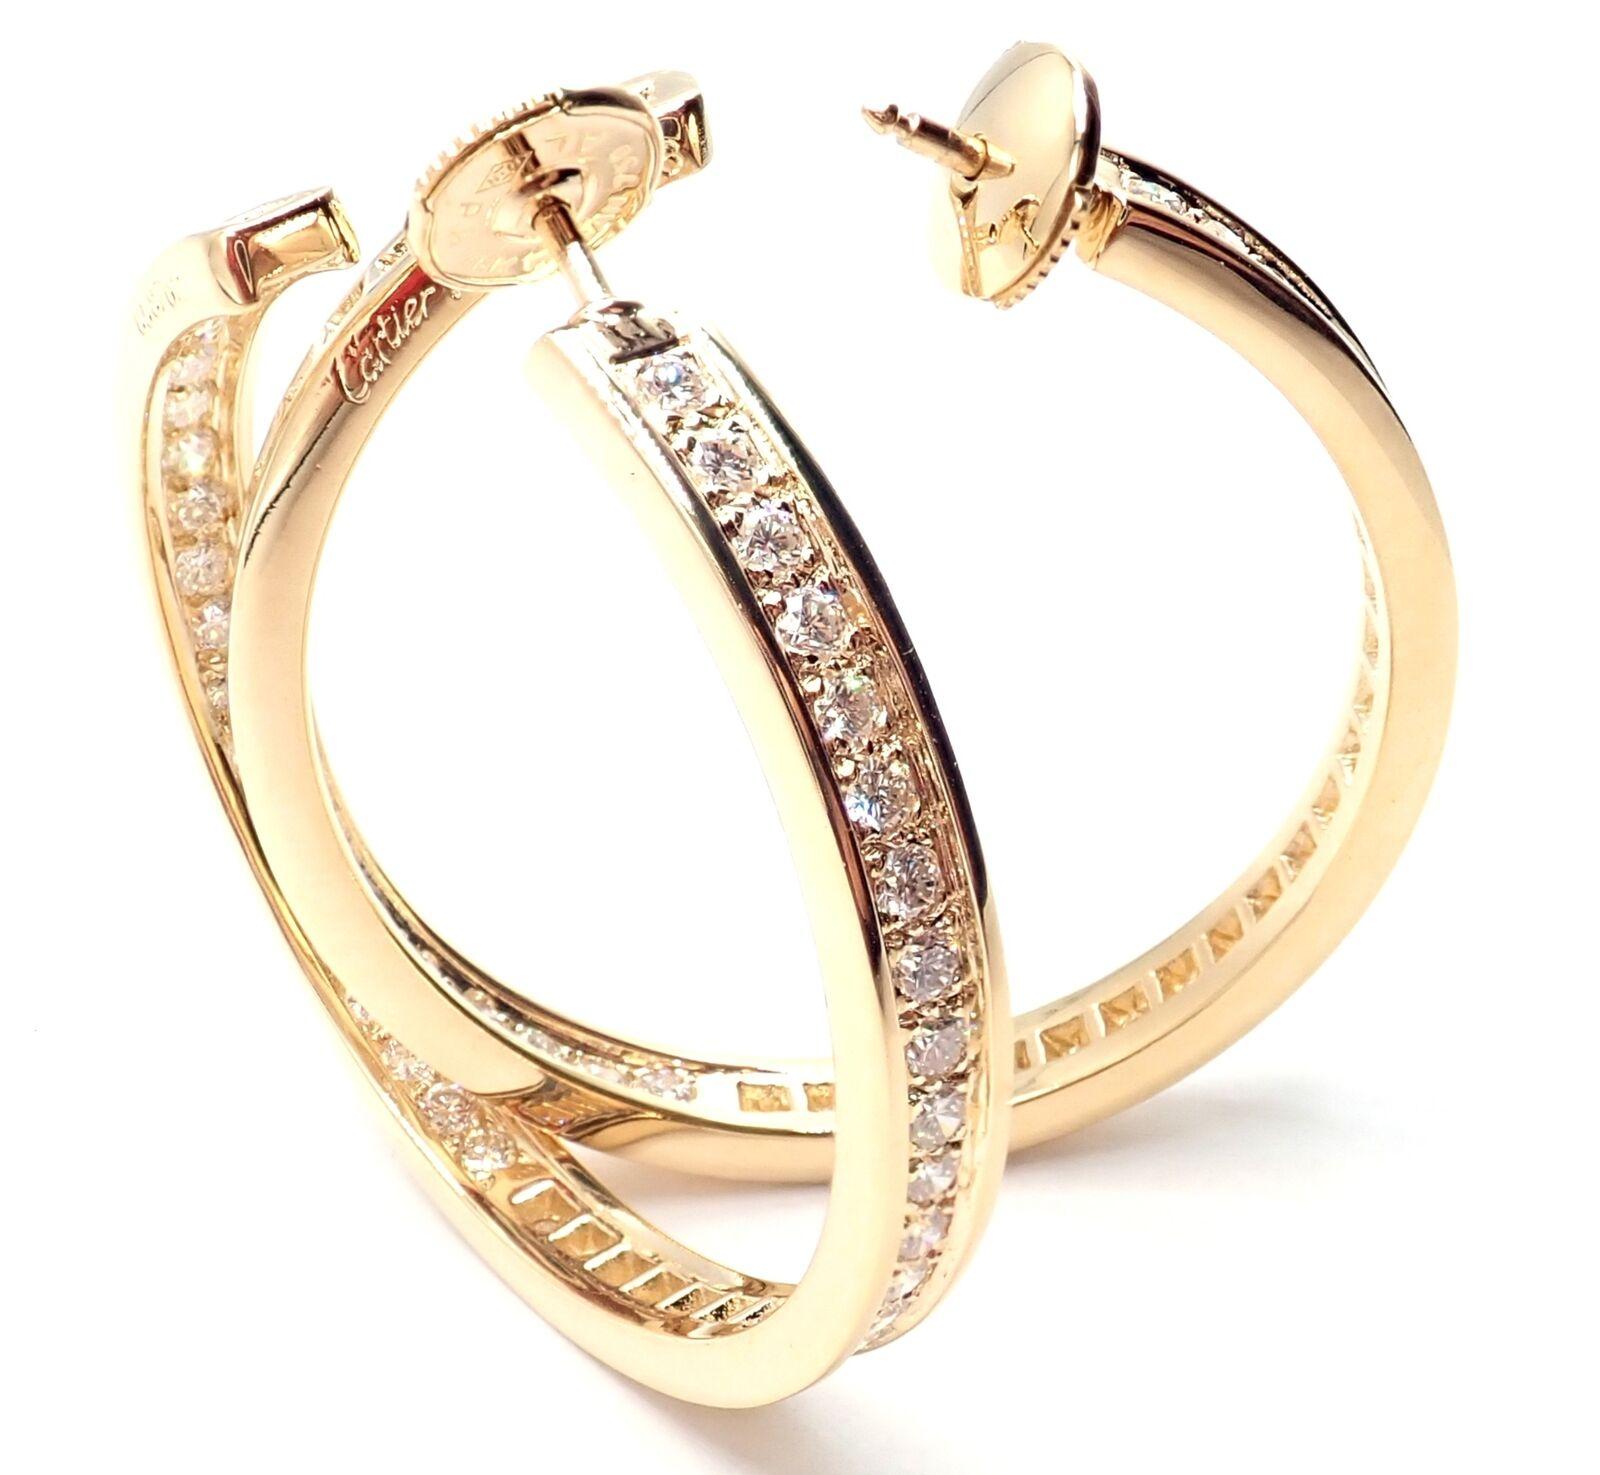 Cartier Inside Out Diamond Large Hoop Yellow Gold Earrings In Excellent Condition For Sale In Holland, PA